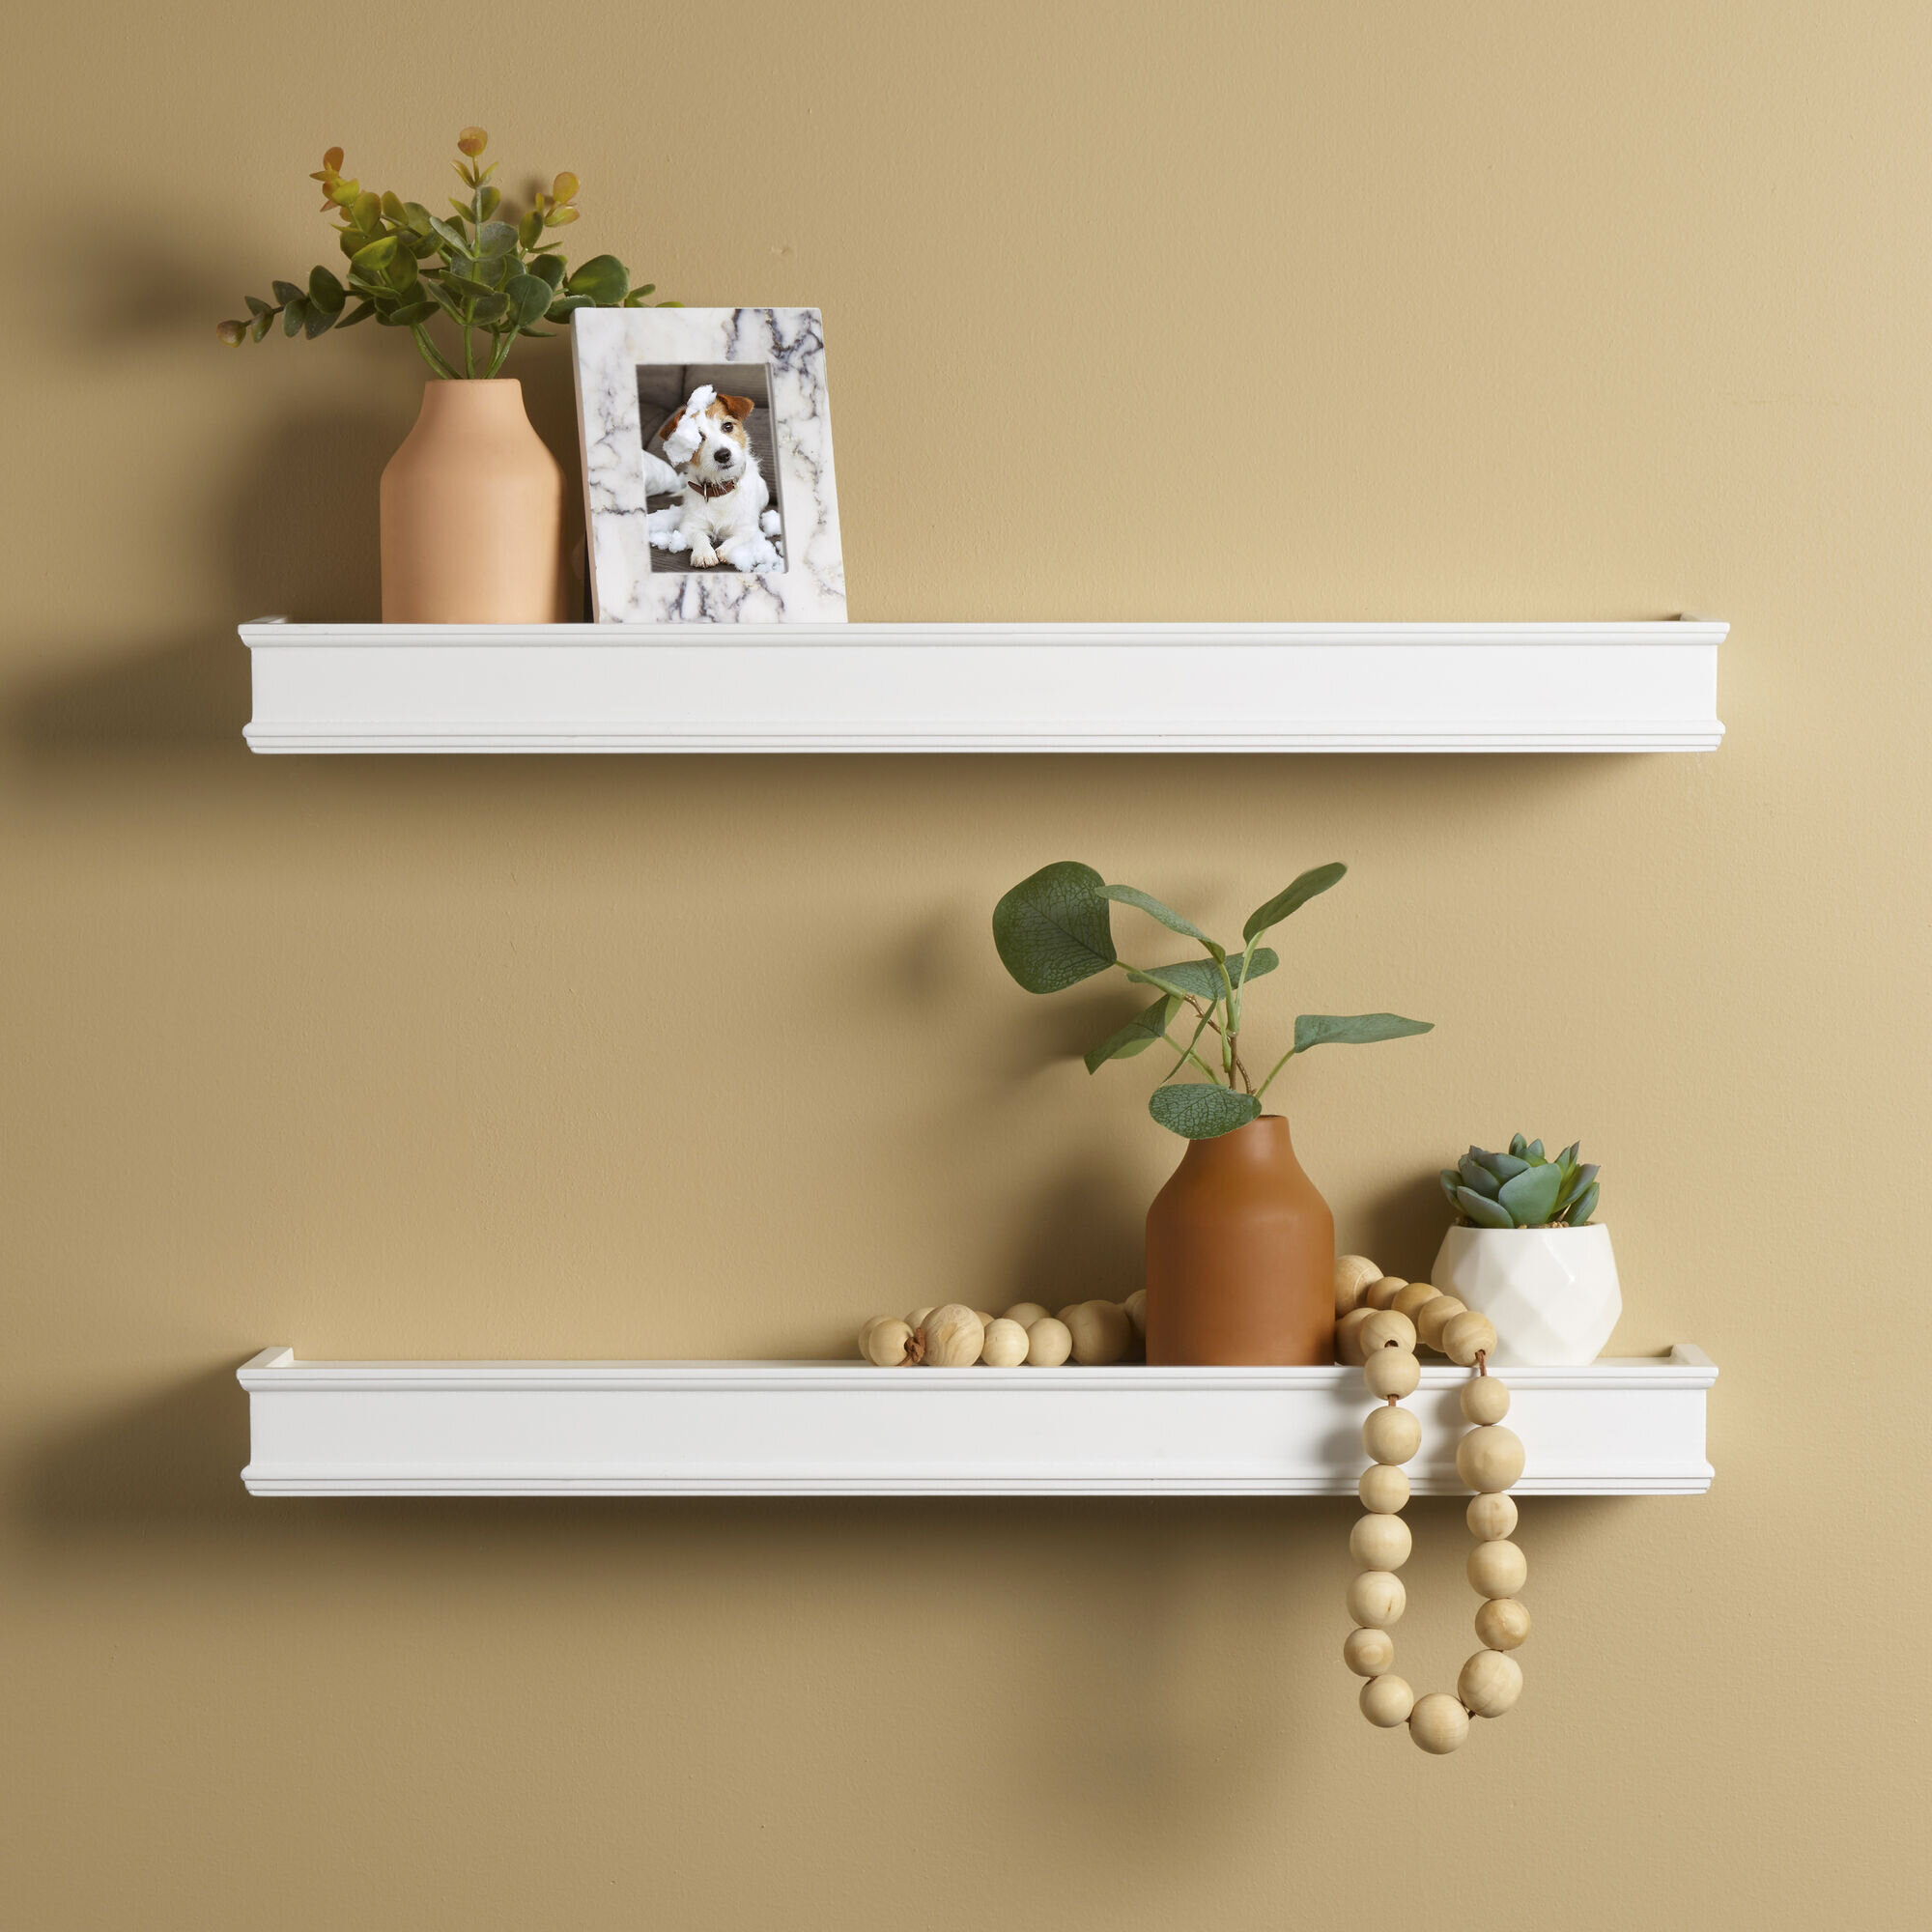 Floating Shelves Wall Mounted Hanging Shelves with White Towel